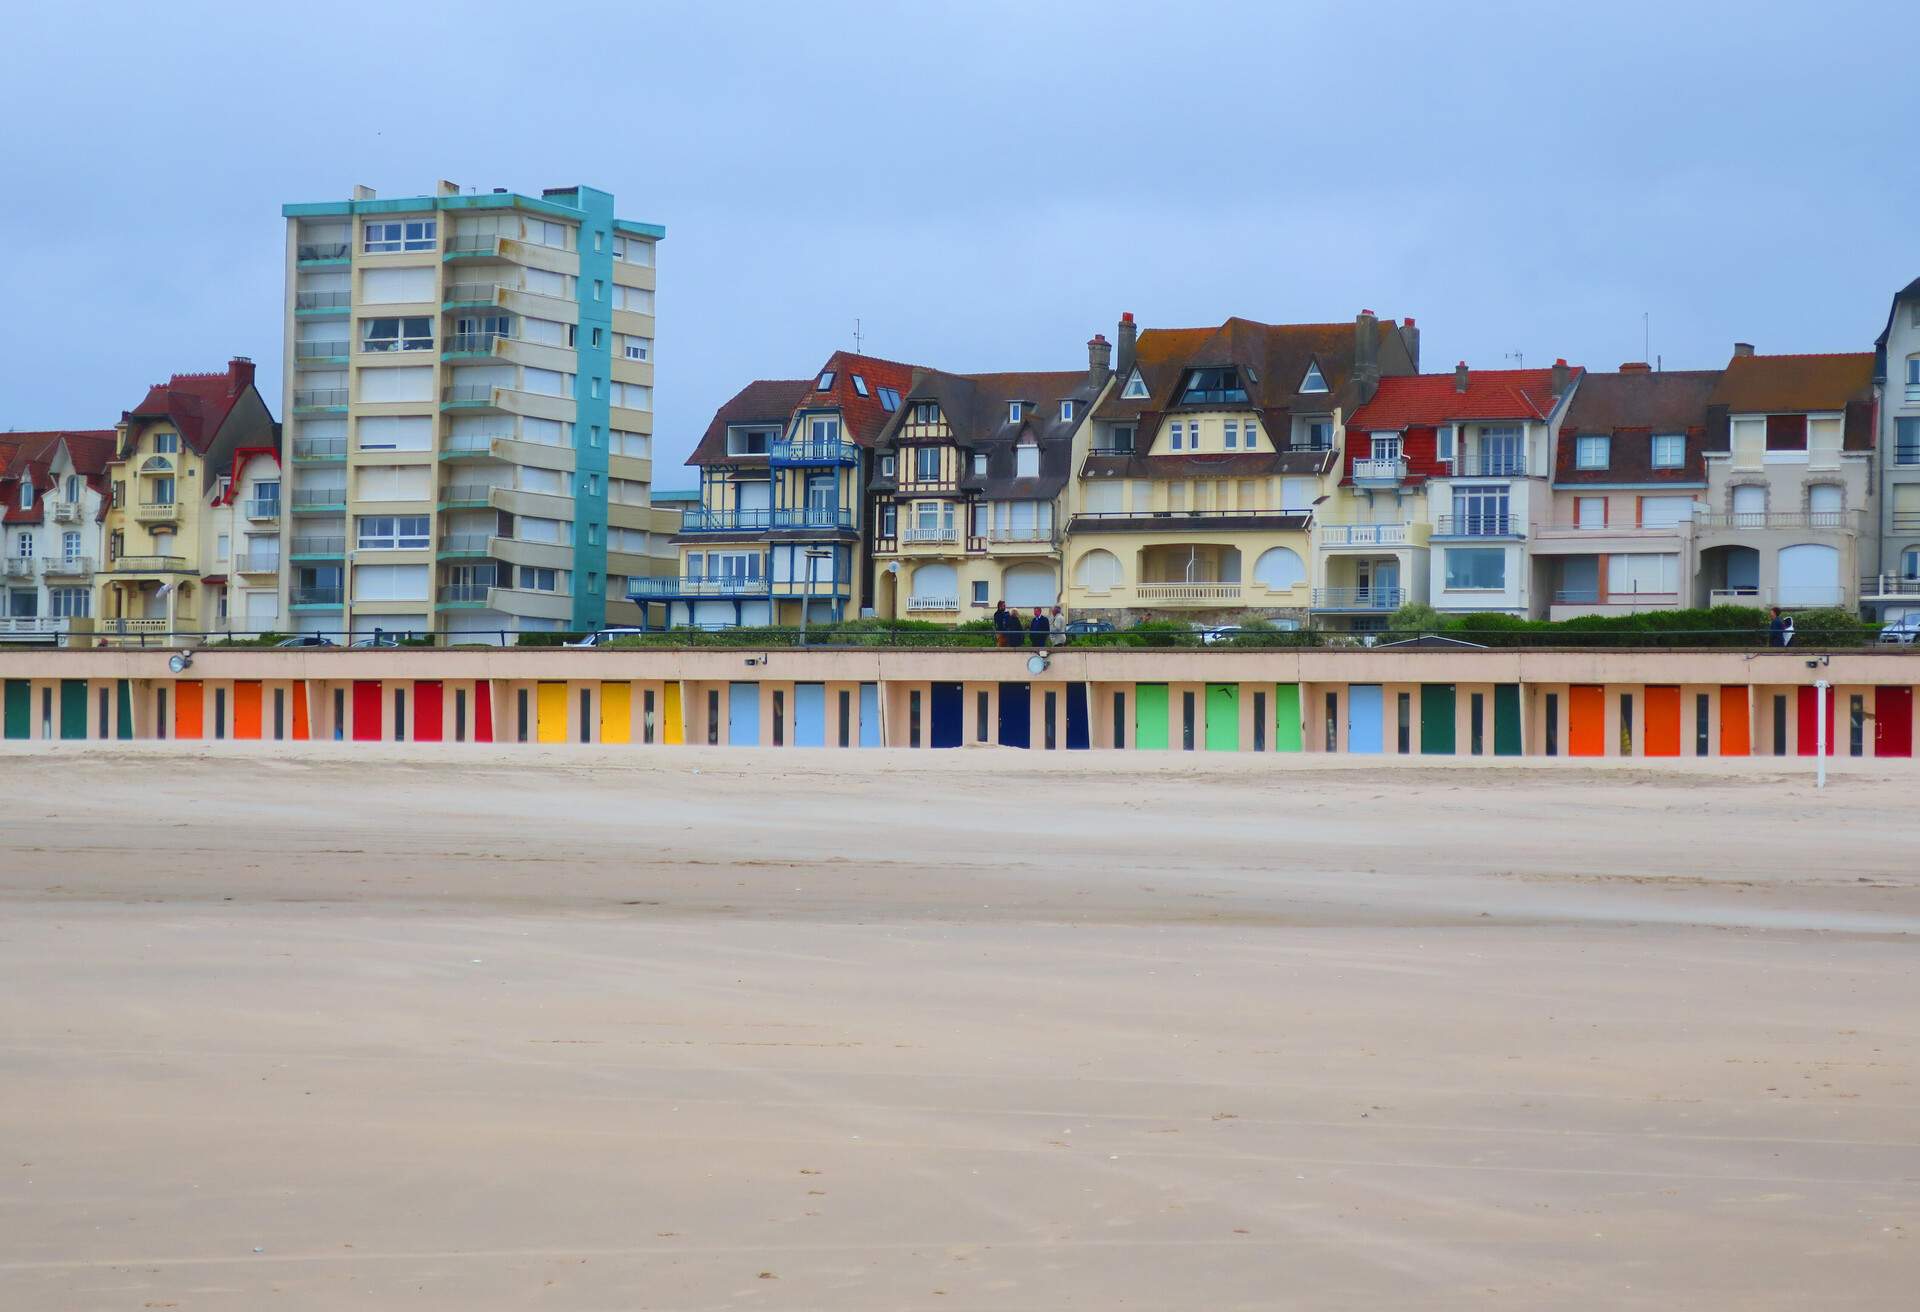 beach cabins on the beach of the Touquet, Hauts de France , France ; Shutterstock ID 666836185